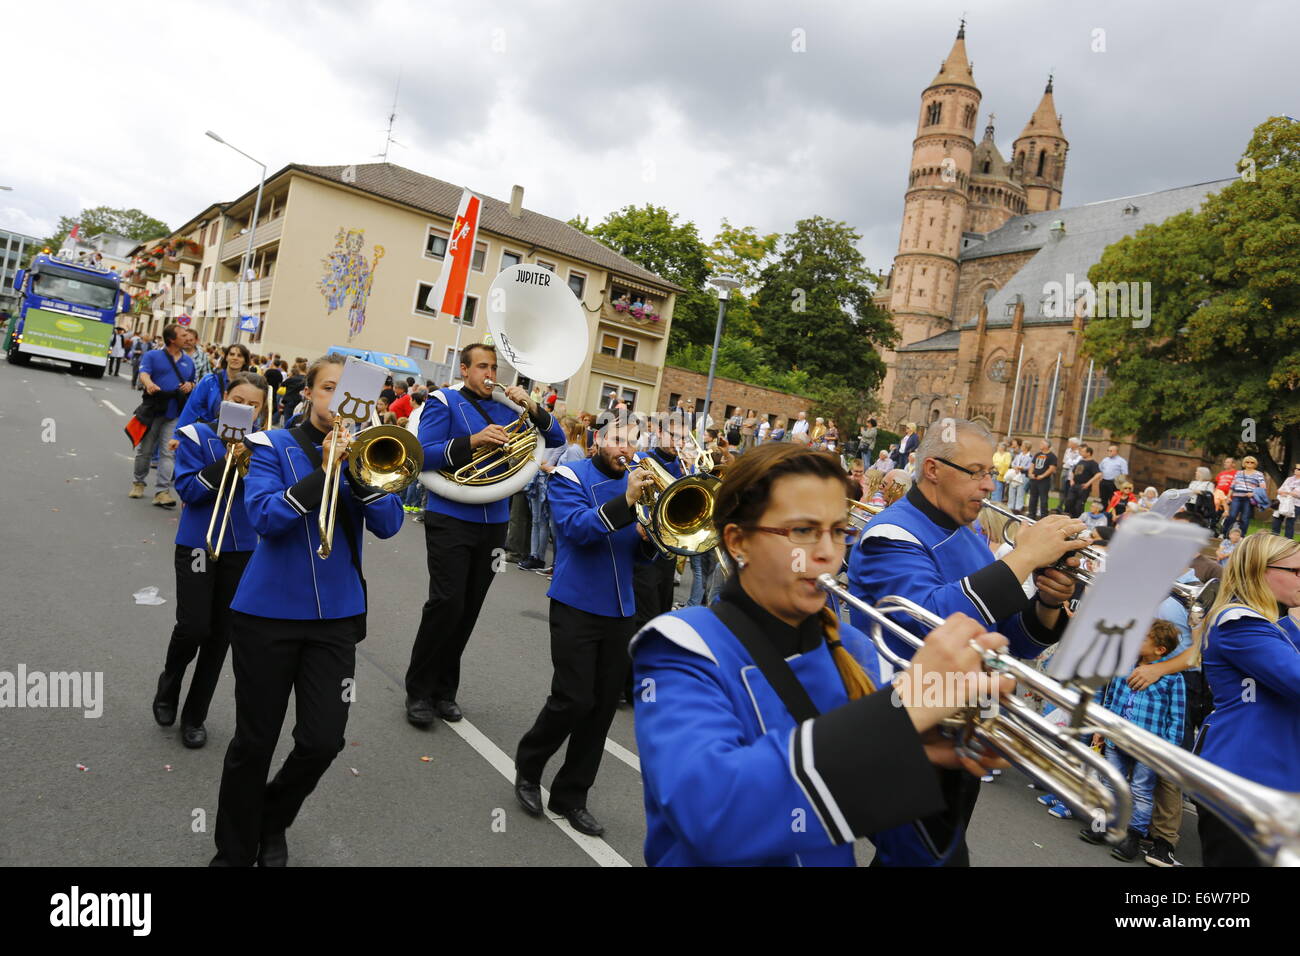 Worms, Germany. 31st Aug, 2014. The marching band Freier Fanfarenzug 1992 Dudweiler e.V. performs at the Backfischfest parade 2014. The cathedral of Worms can be seen in the background. The first highlight of this year's Backfischfest was the big parade through the city of Worms with 125 groups and floats. Community groups, sport clubs, music groups and business from Worms and further afield took part. © Michael Debets/Pacific Press/Alamy Live News Stock Photo